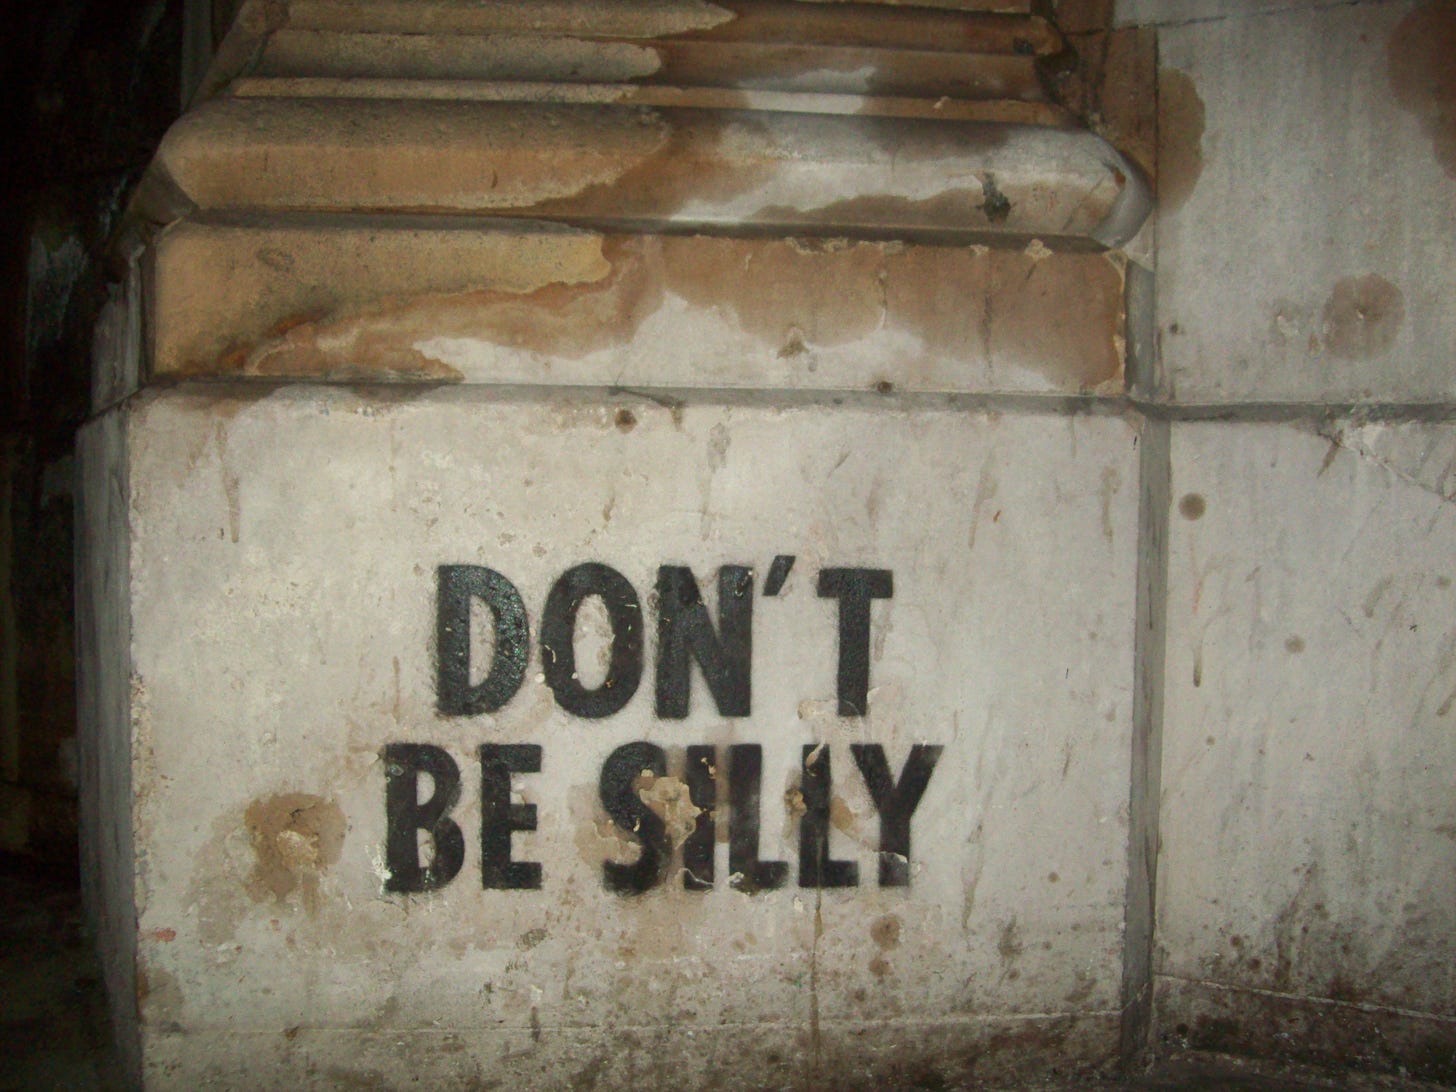 A stenciled graffito on a stone wall: it says "don't be silly."